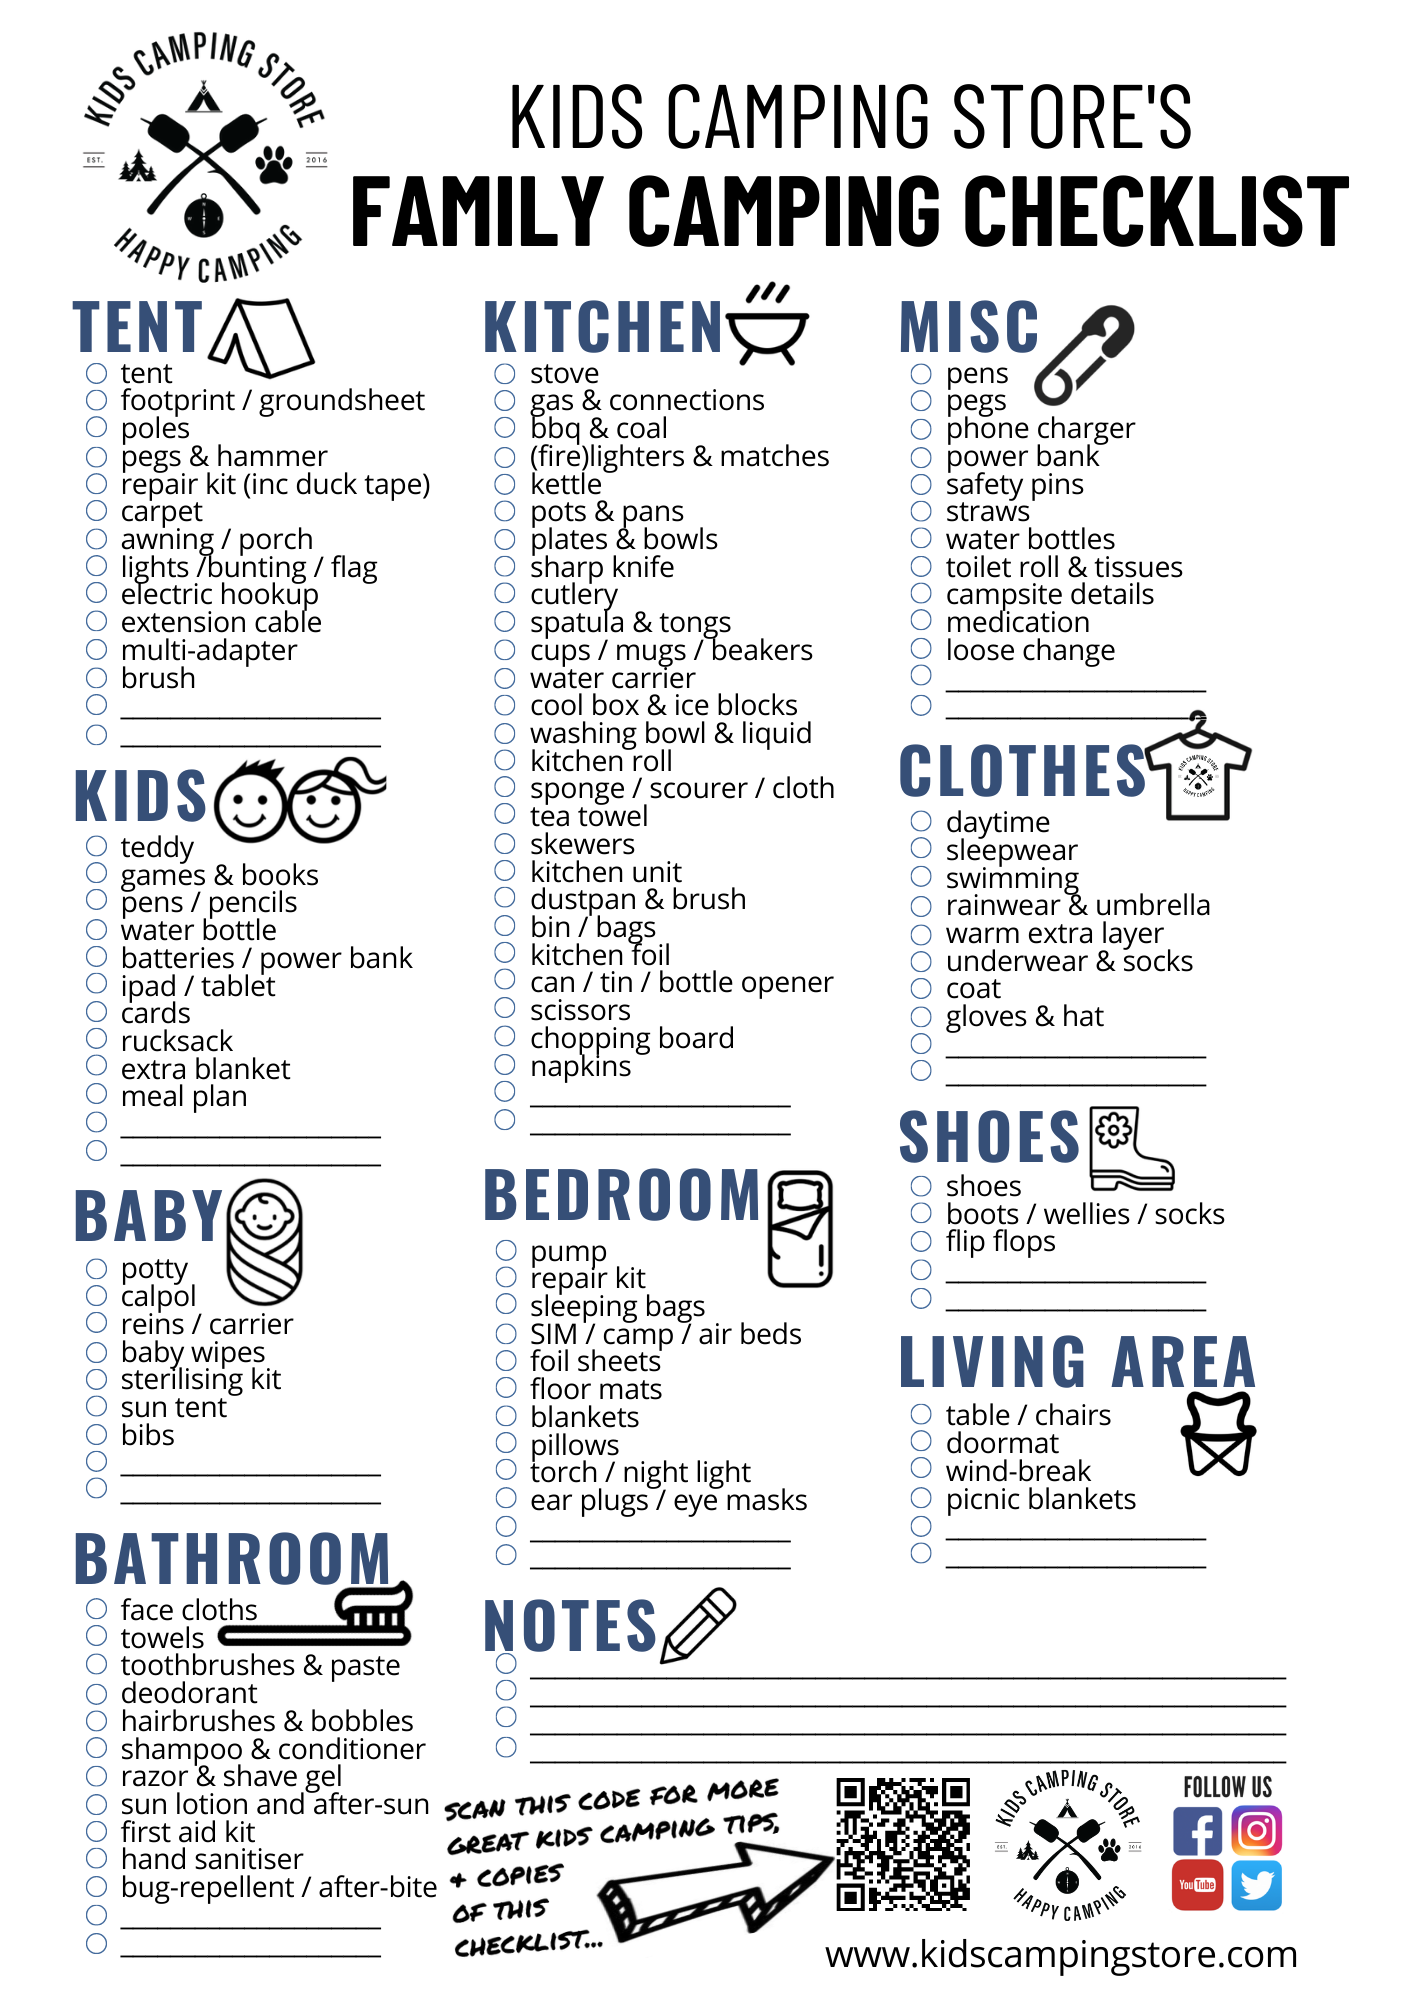 Our Family Camping Checklist – Kids Store